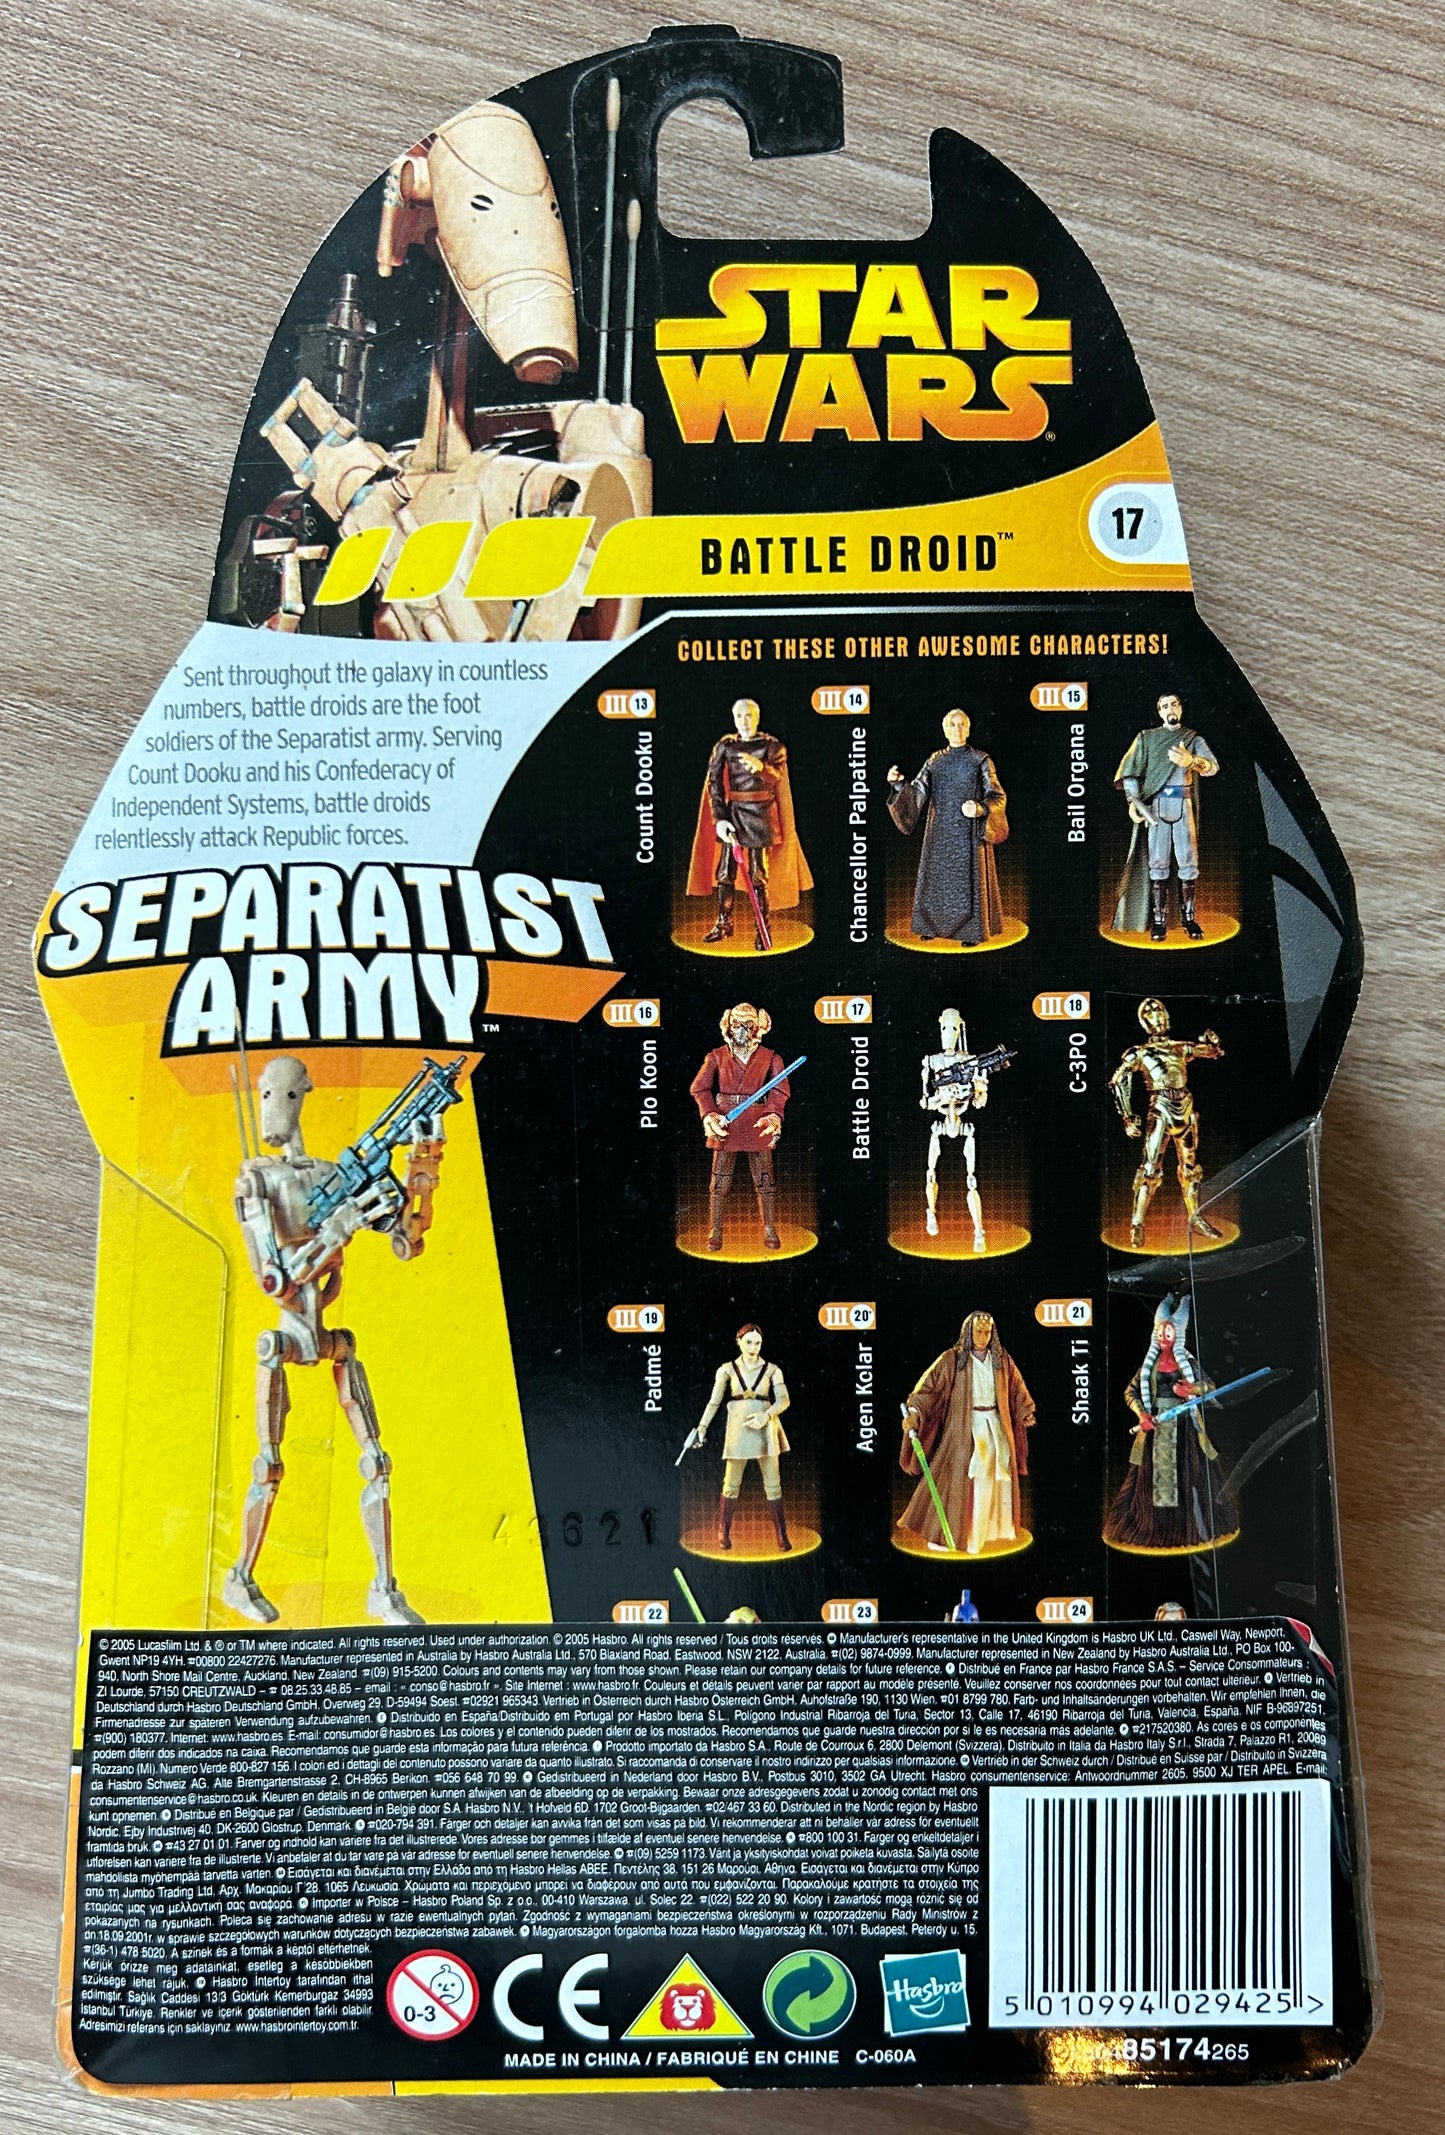 STAR WARS - Revenge of the Sith ROTS - Figurine Battle Droid